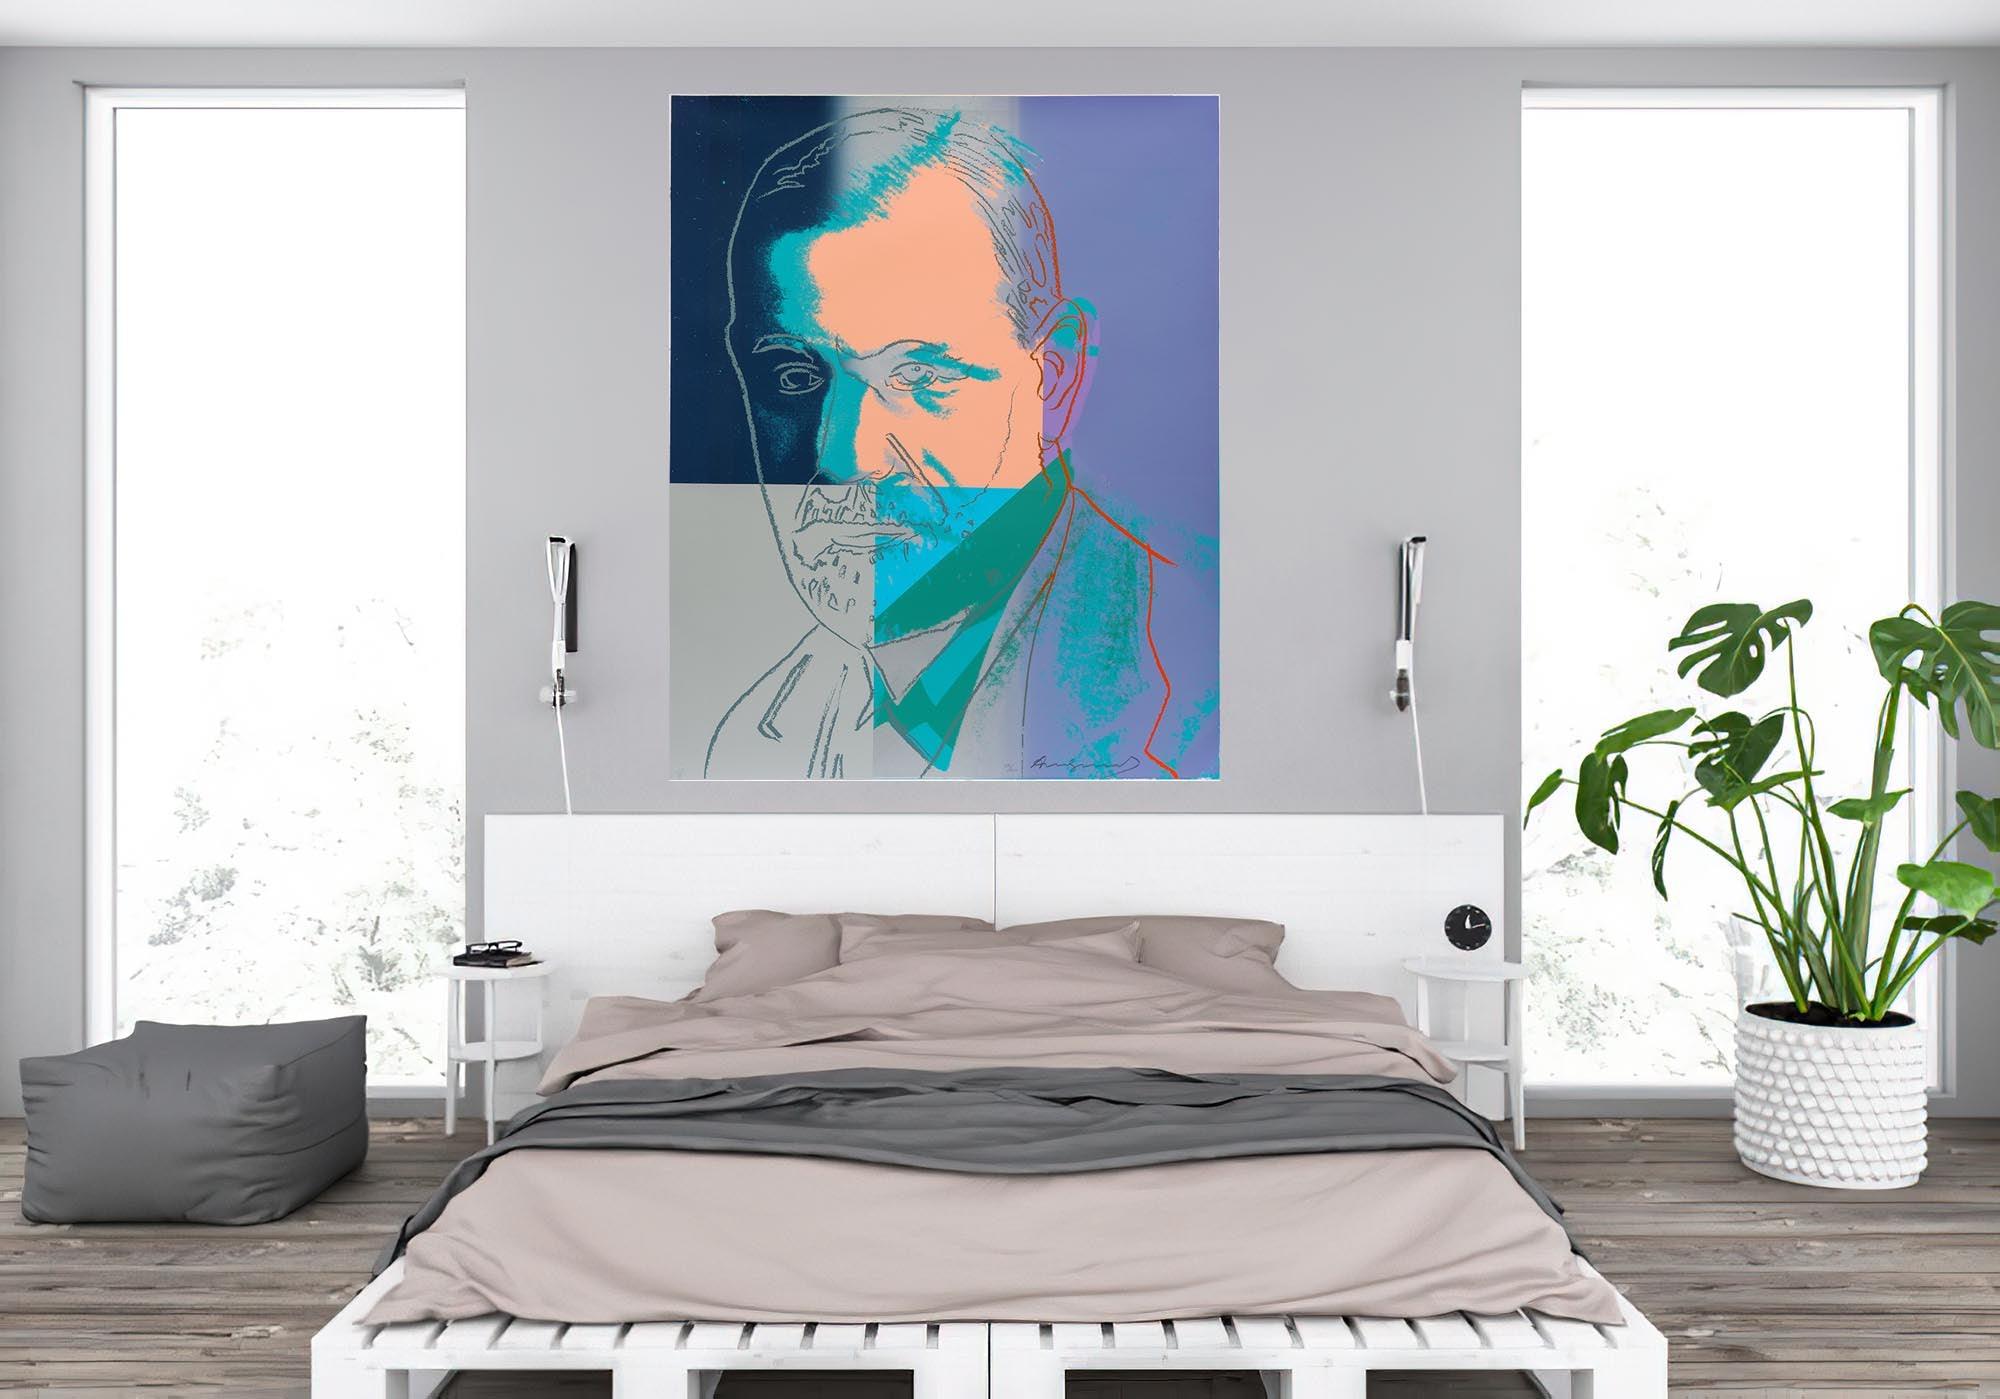 CoolWalls.ca Posters, Prints, & Visual Artwork Sigmund Freud from the series "Ten Portraits of Jews of The Twentieth Century" Andy Warhol Vintage Artwork: Peel_n_Stick onto the wall, wallpaper like fabric